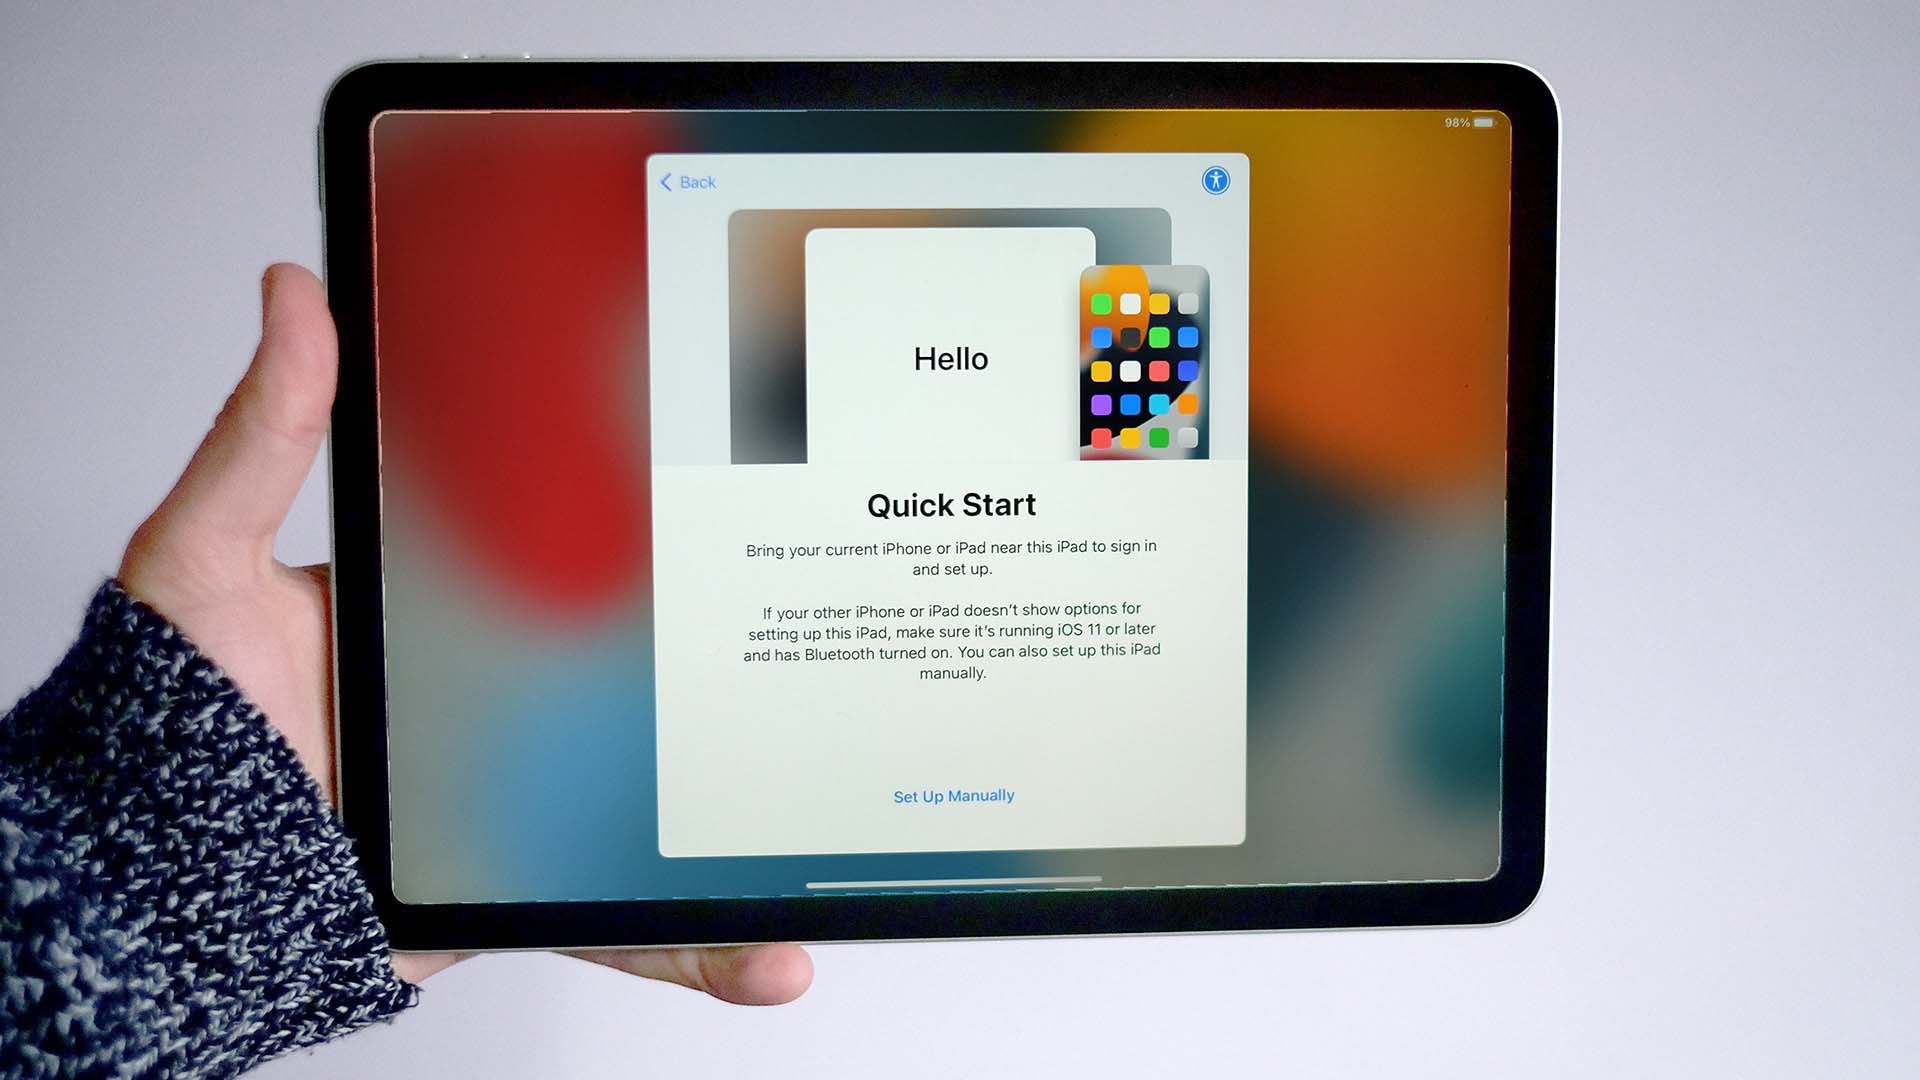 An iPad with the screen showing the Quick Start page